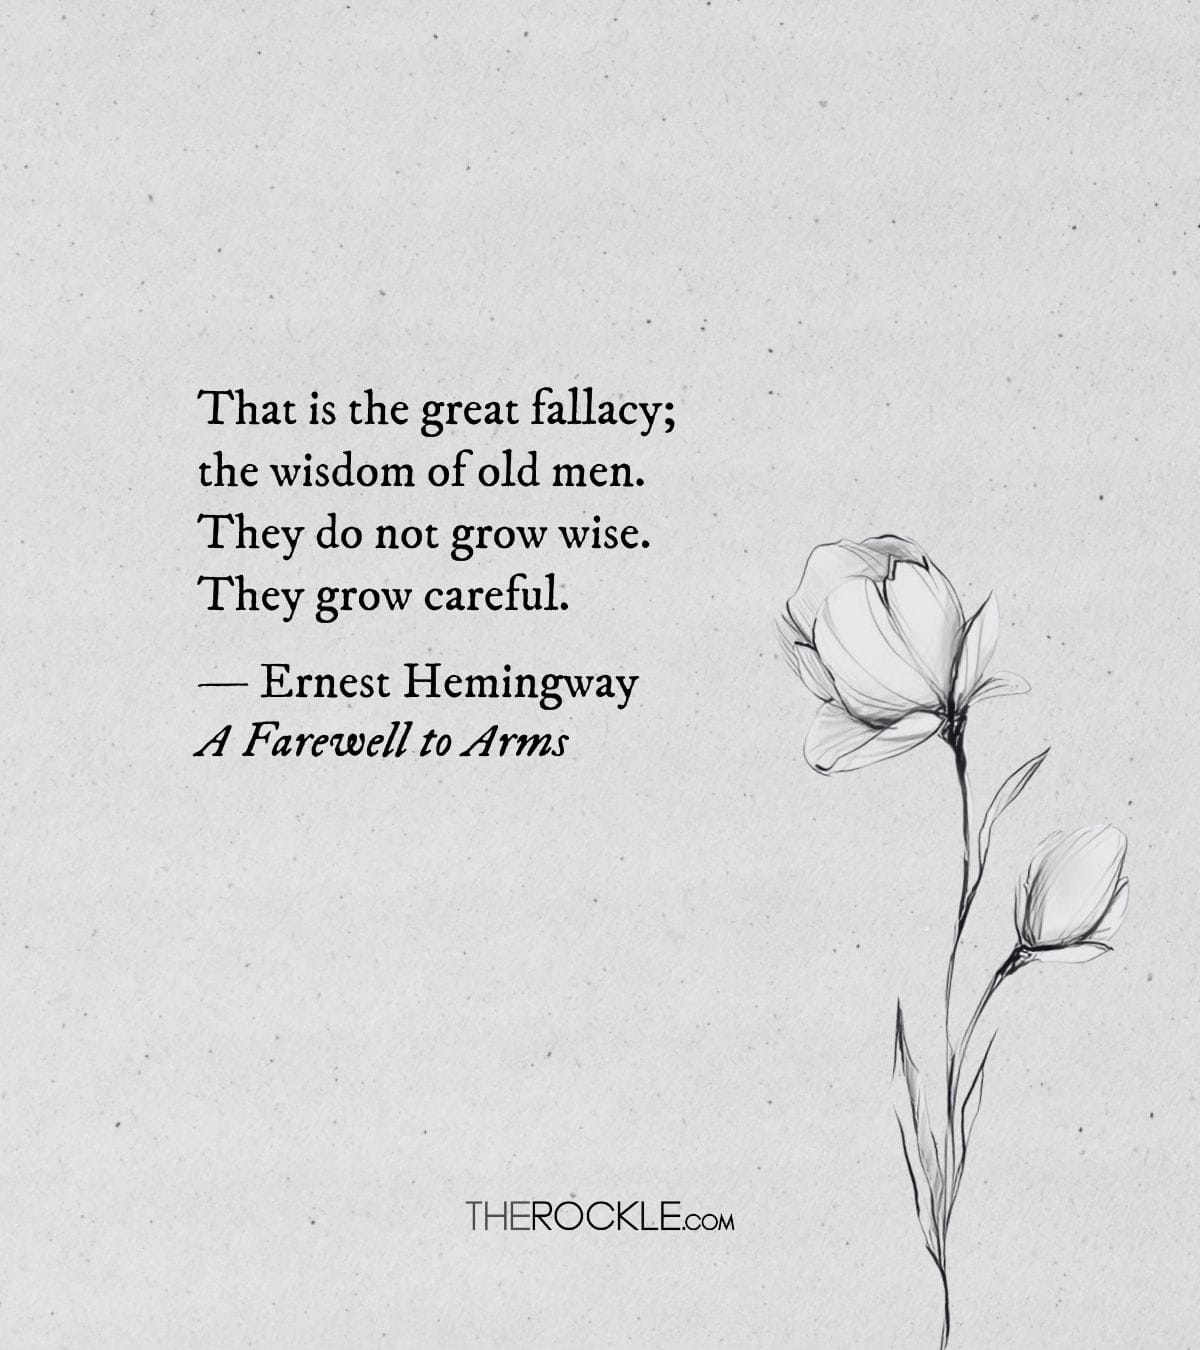 Hemingway on old age and wisdom